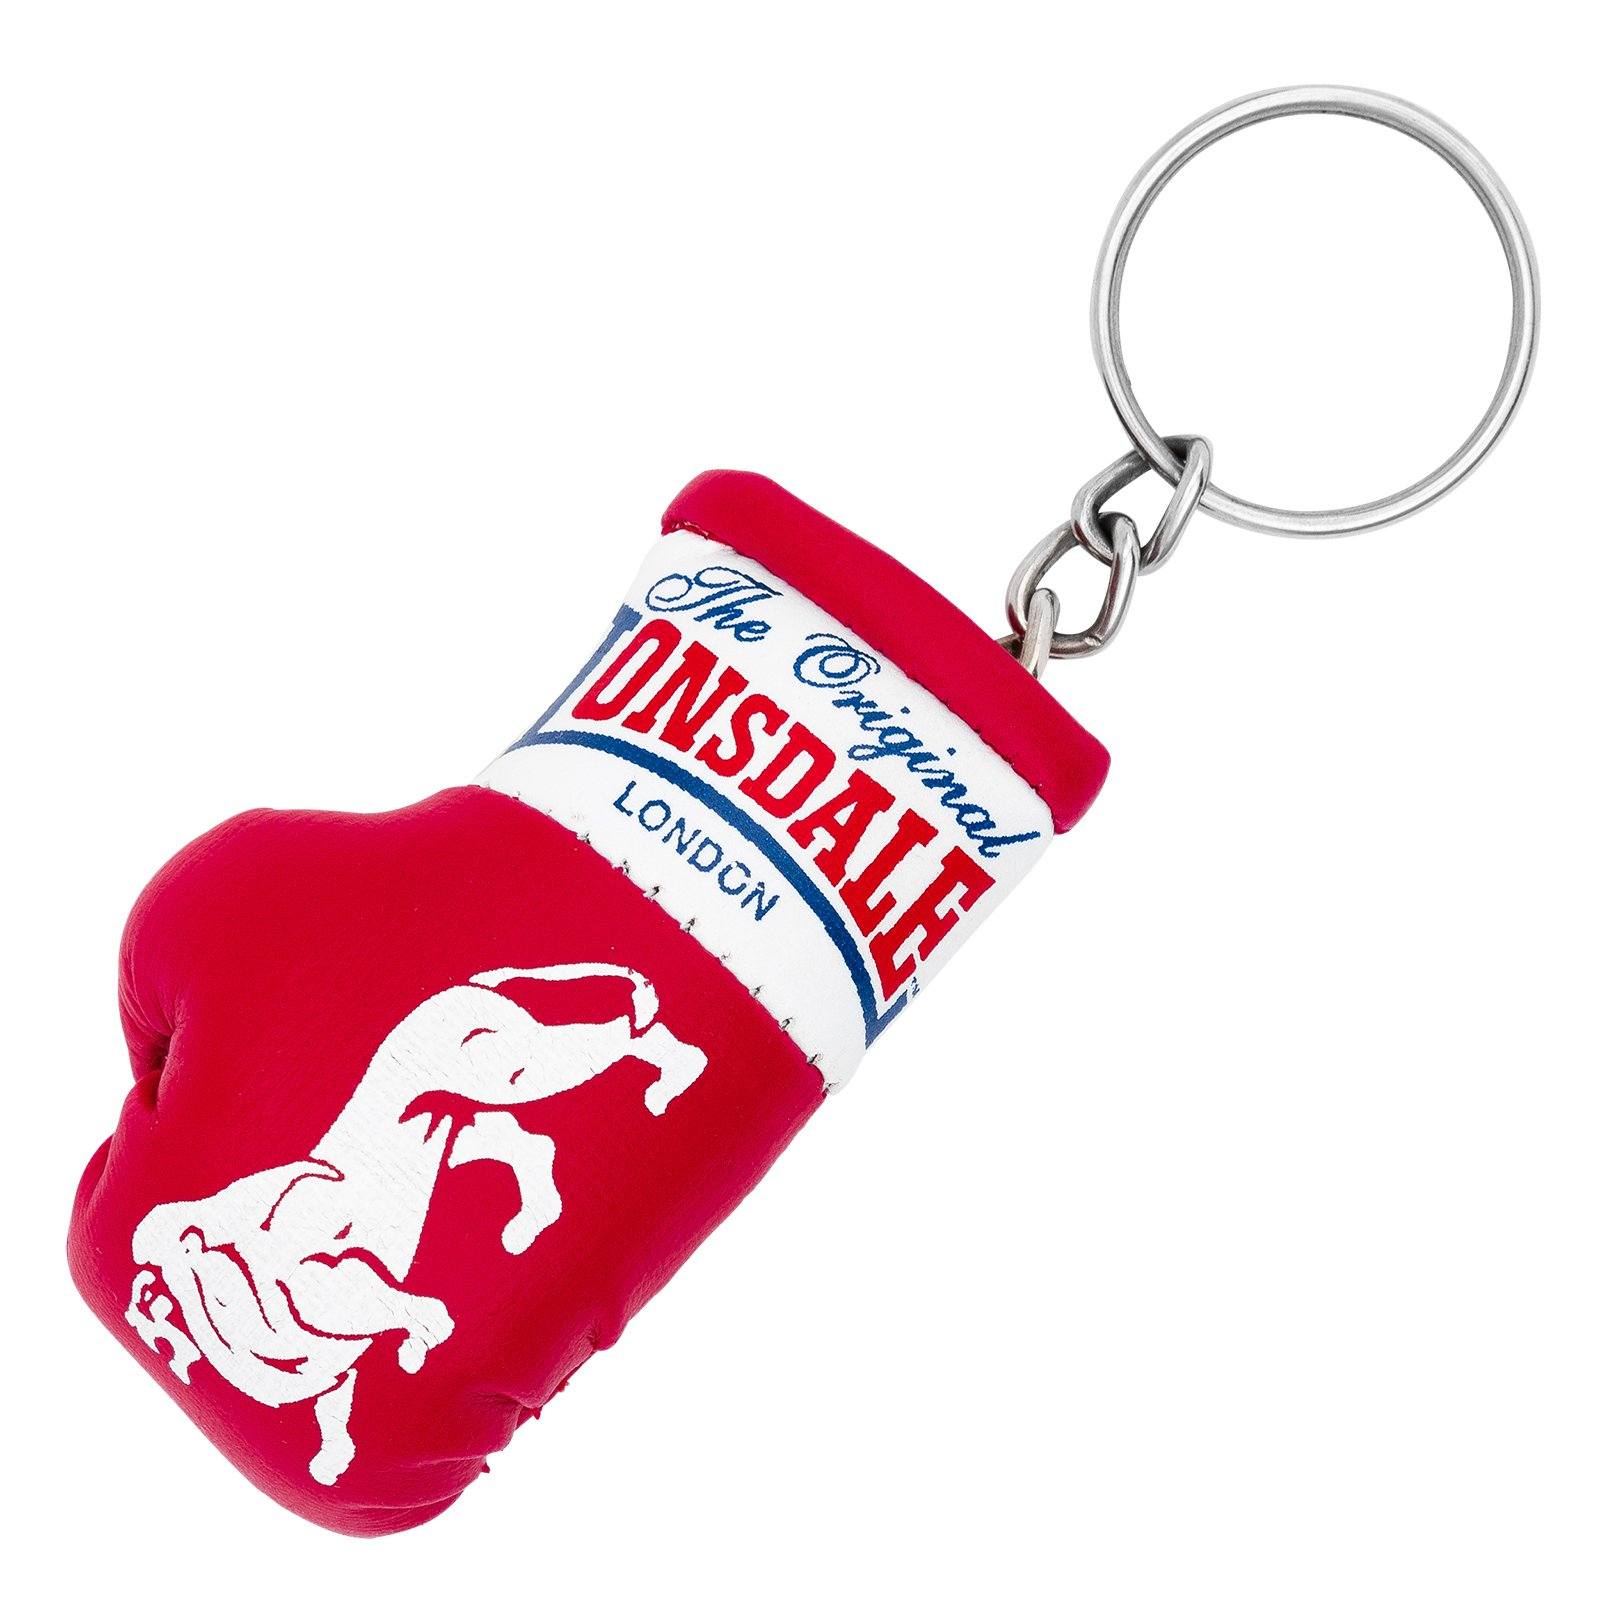 Lonsdale Keychain boxing